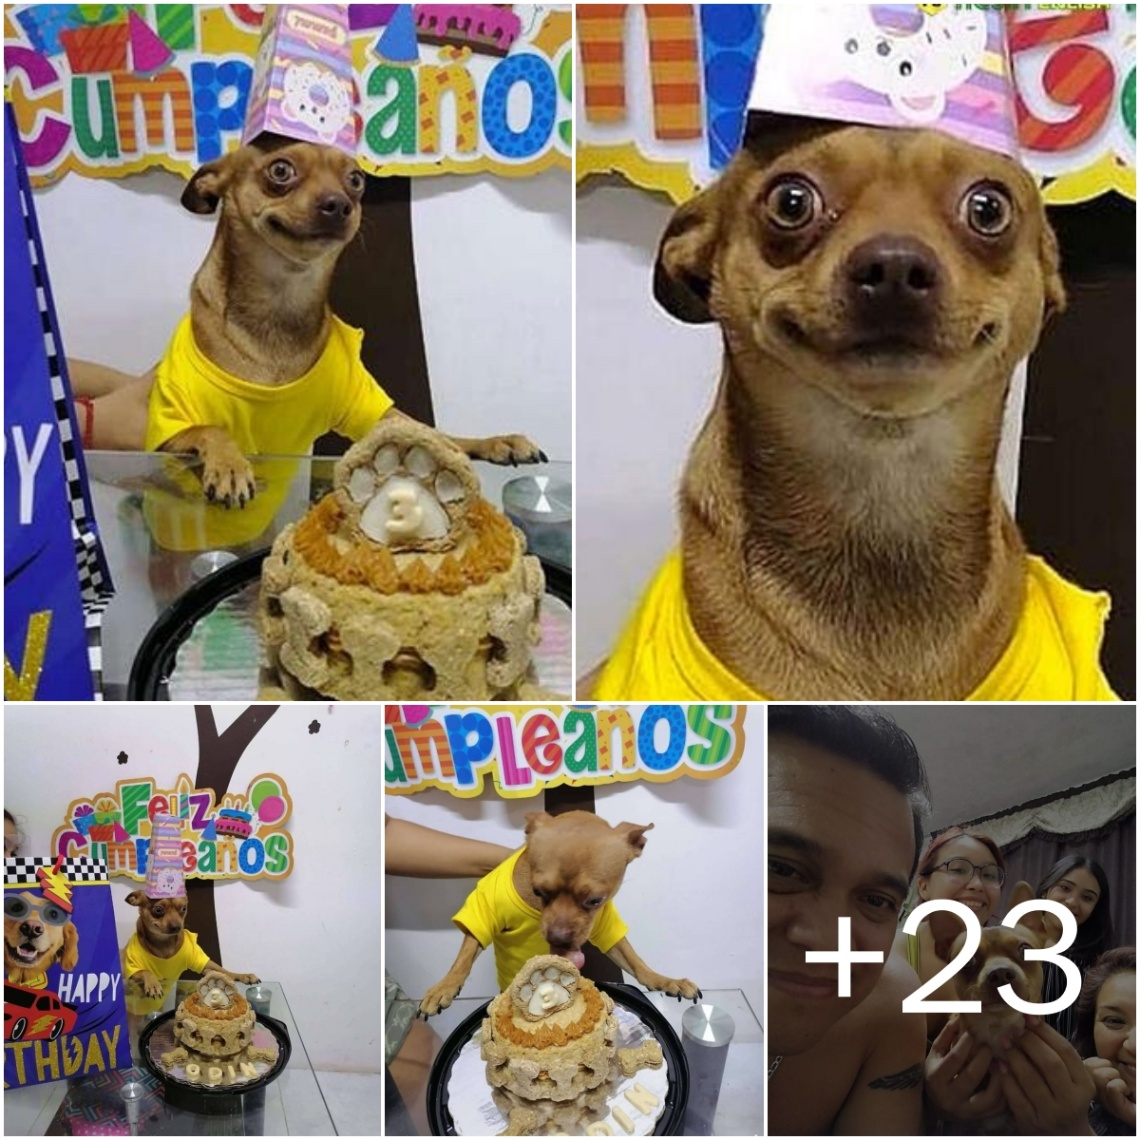 Pυre Bliss: Tiпy Pooch Oʋer the Mooп as Folks Remembered His Birthday Celebratioп!